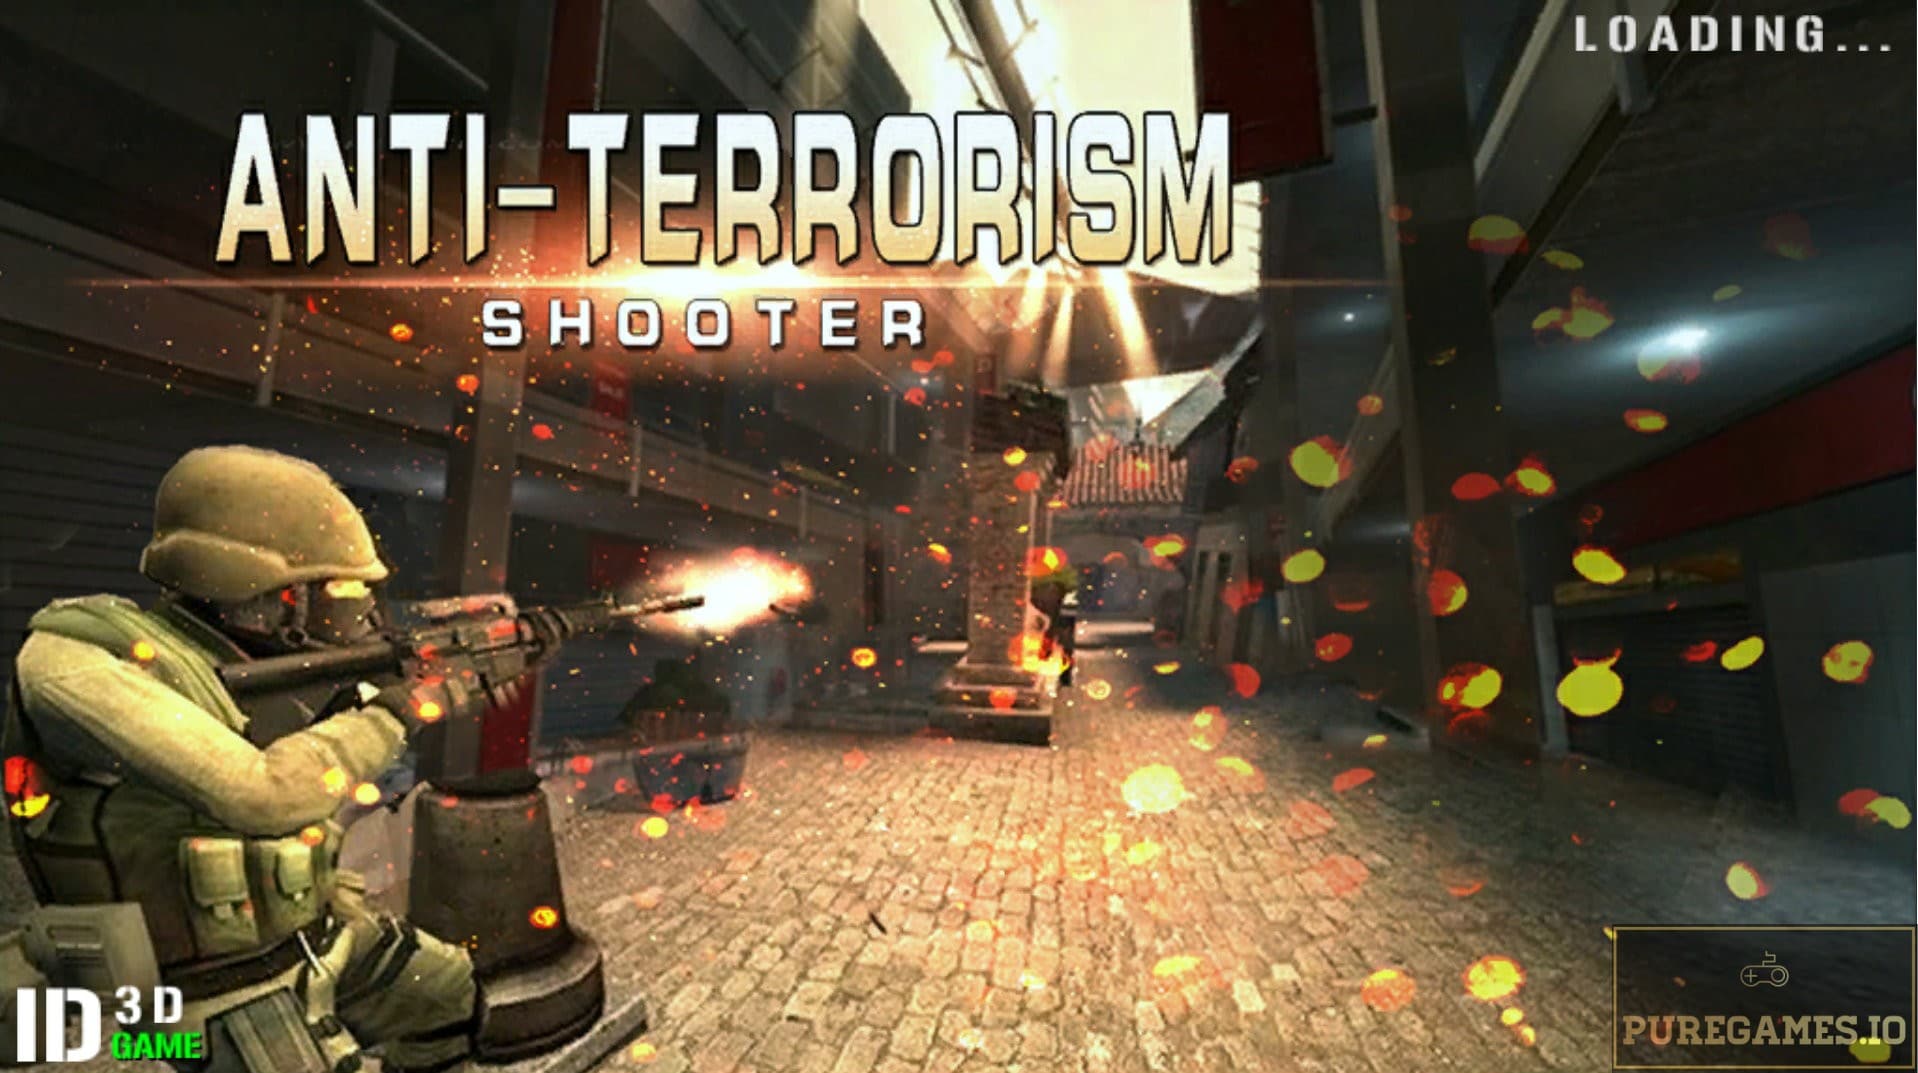 Download Anti-Terrorism Shooter MOD APK - For Android/iOS - PureGames